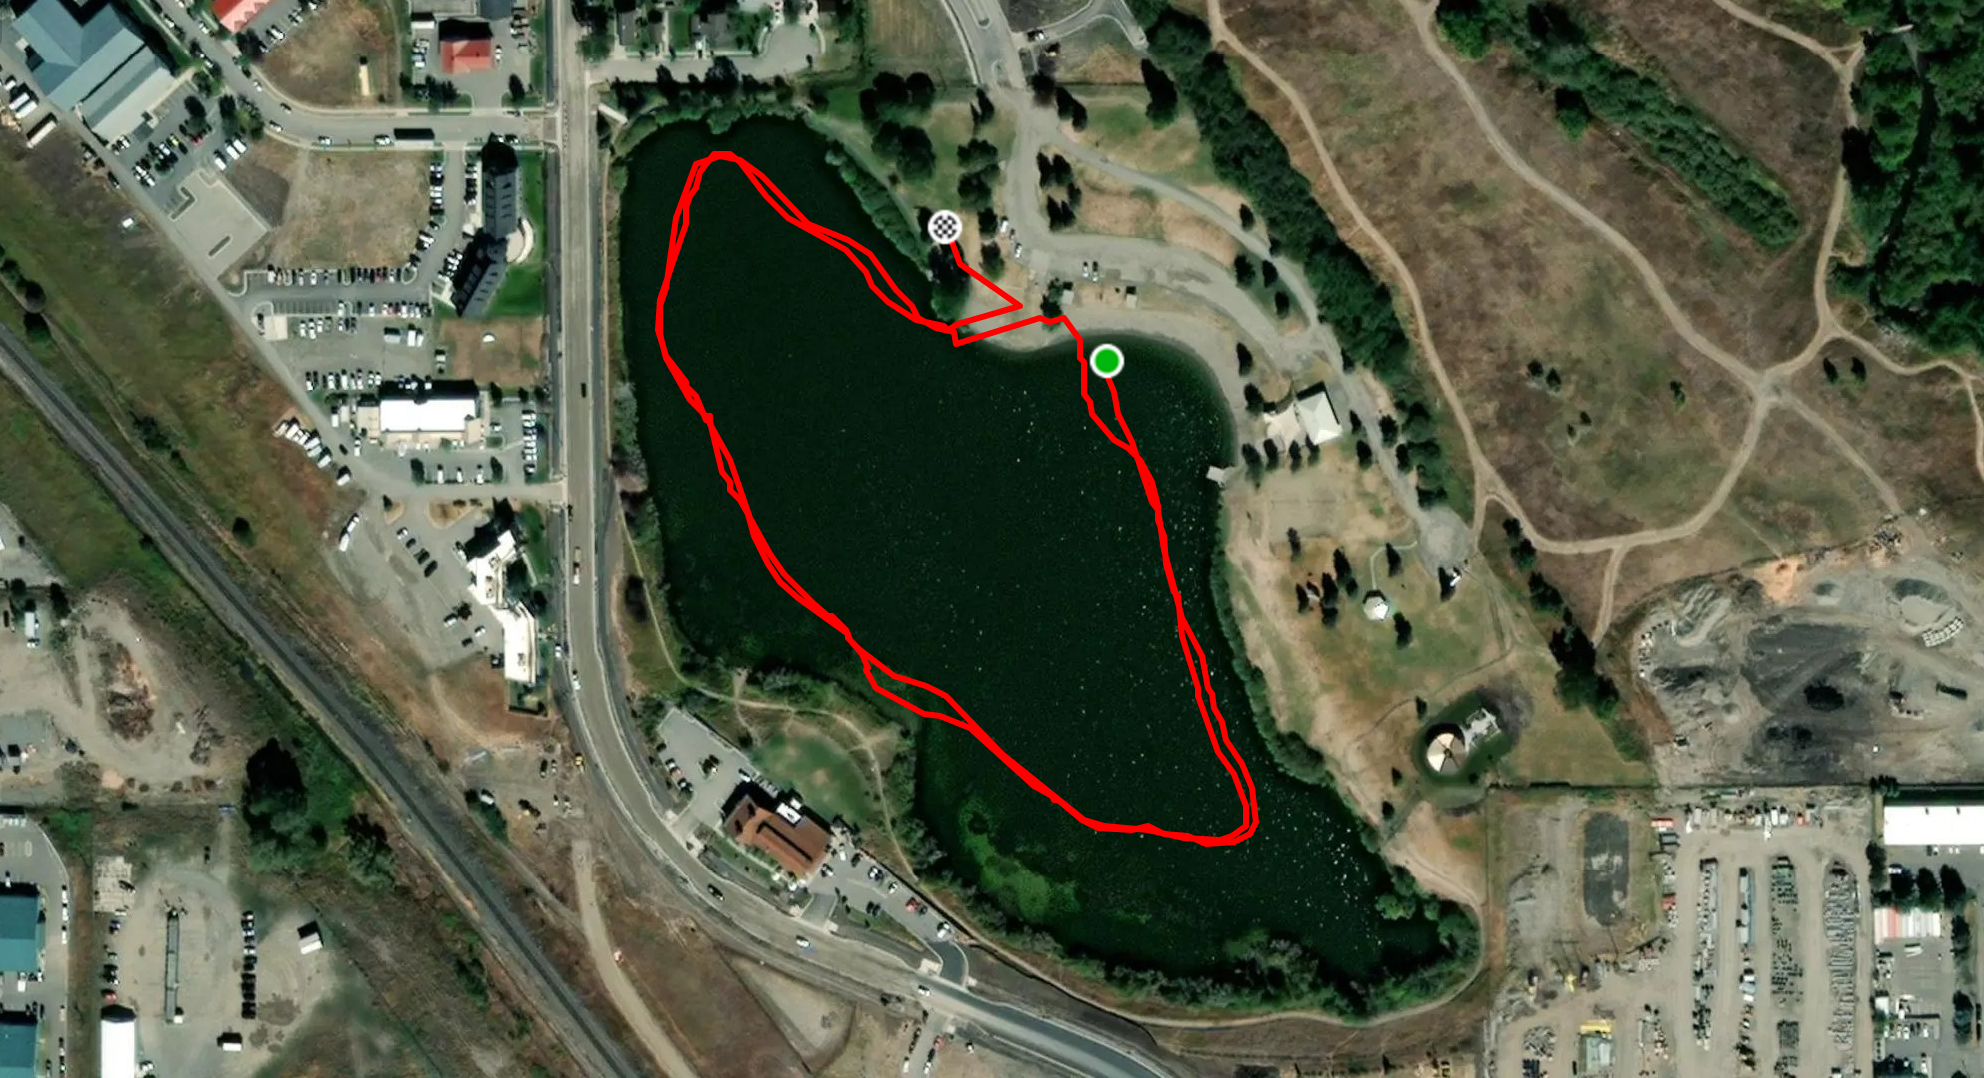 A satellite view of Glen Lake, showing the GPS track from my swim.